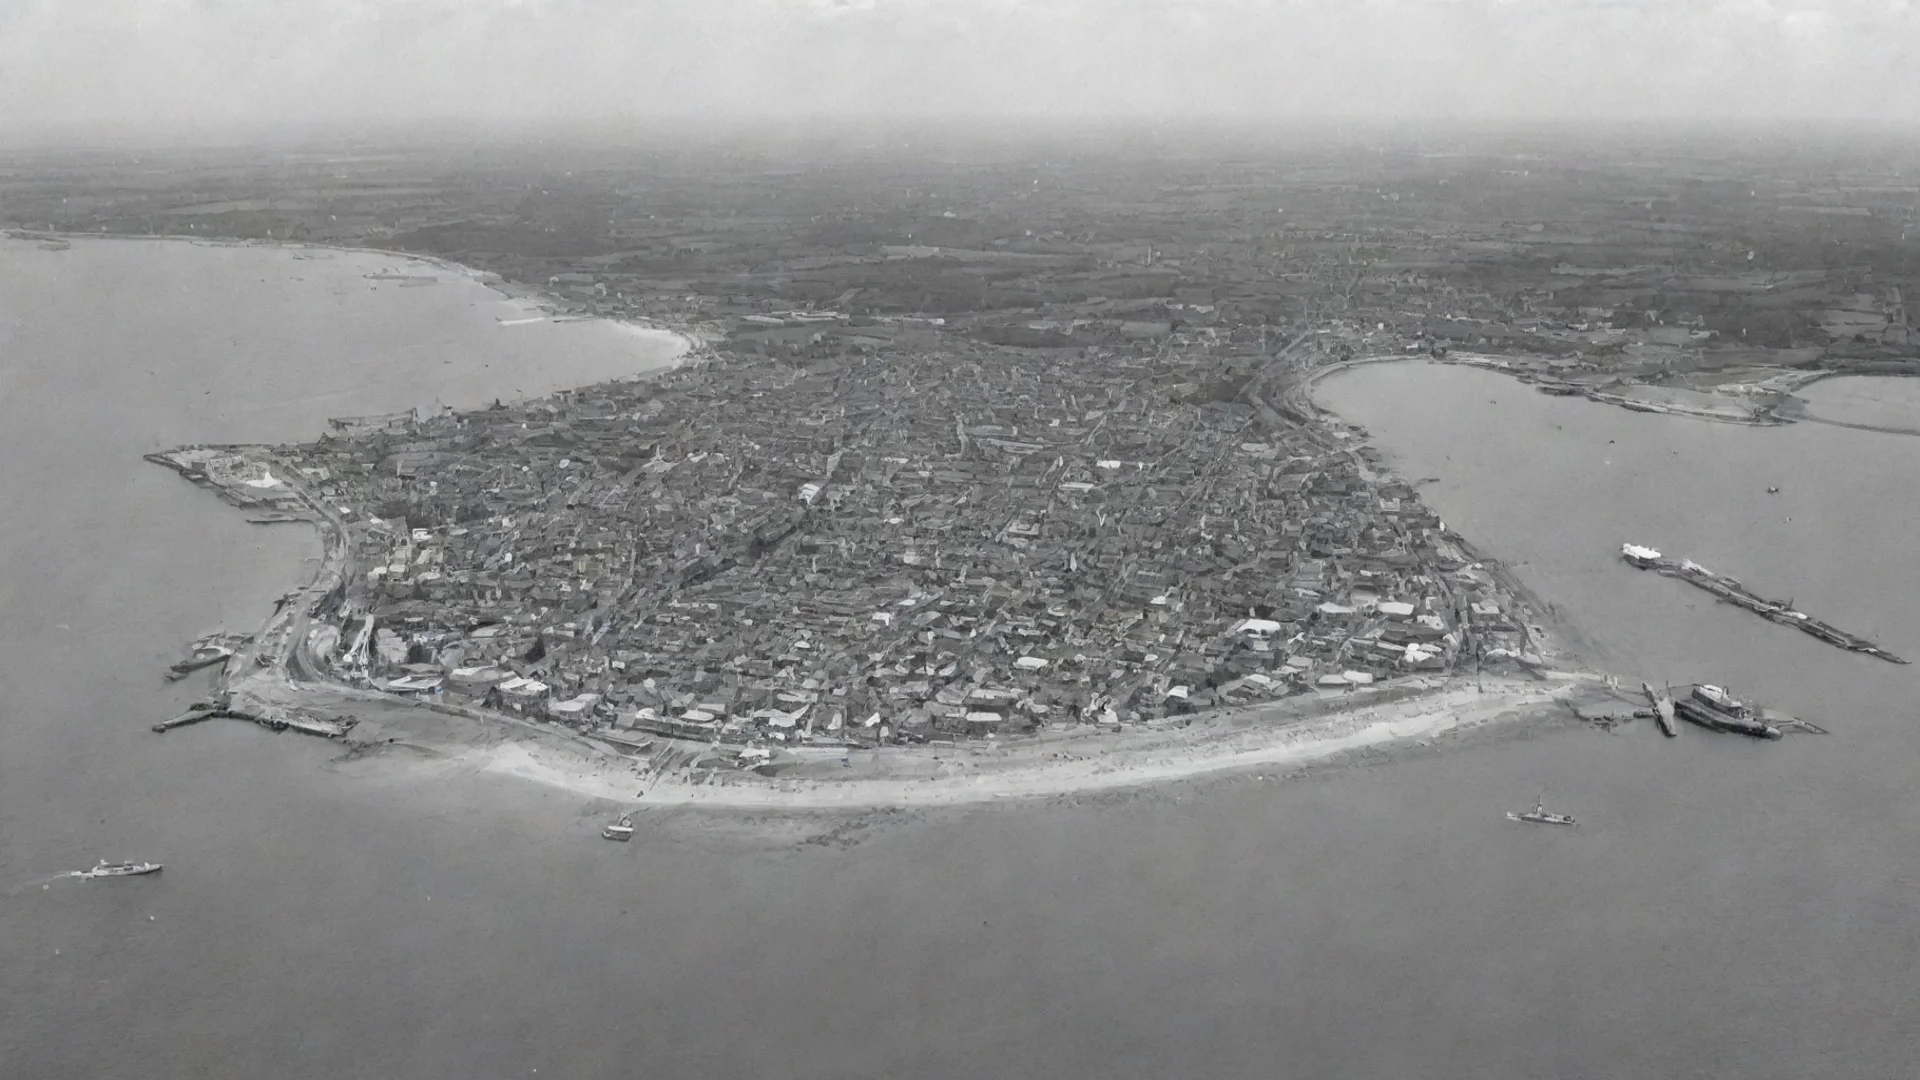 southsea tropicalsmall island port mid 1930s wide